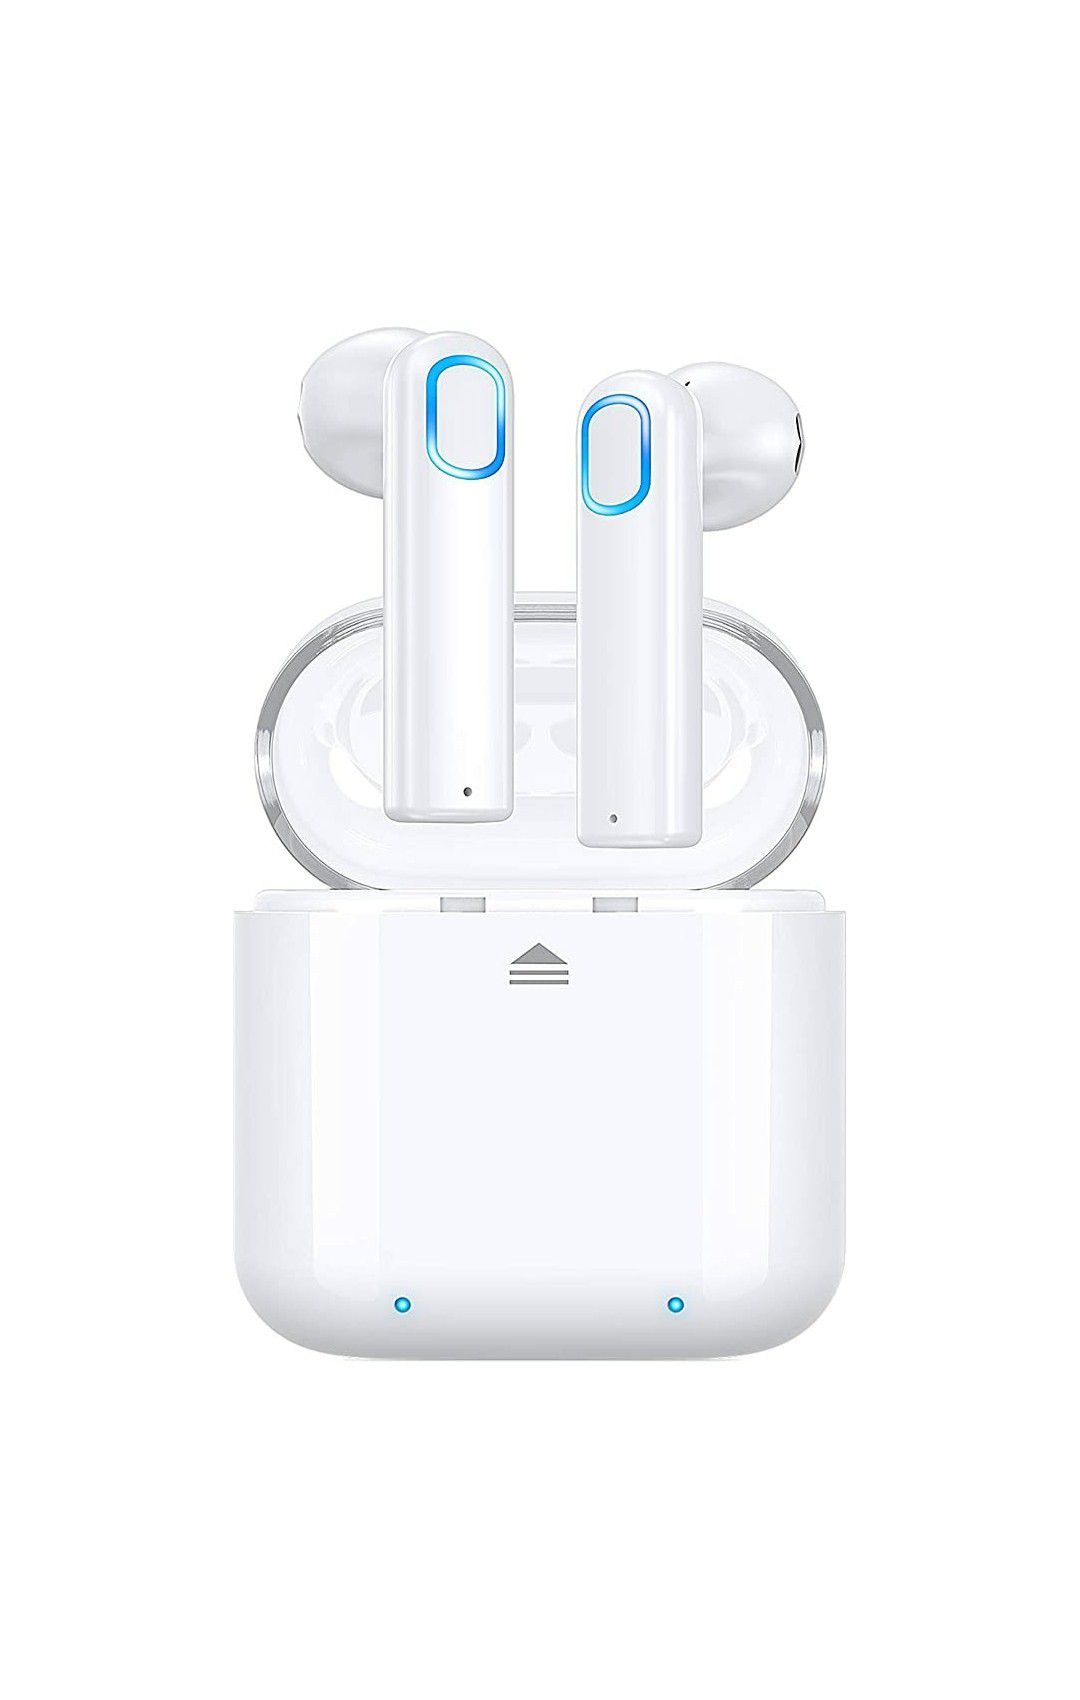 (A18) Wireless Earbuds Bluetooth 5.0, GPED True Wireless Earbuds Headphones with Charging Case, 20Hrs Playback, One-Step Pairing, (White)